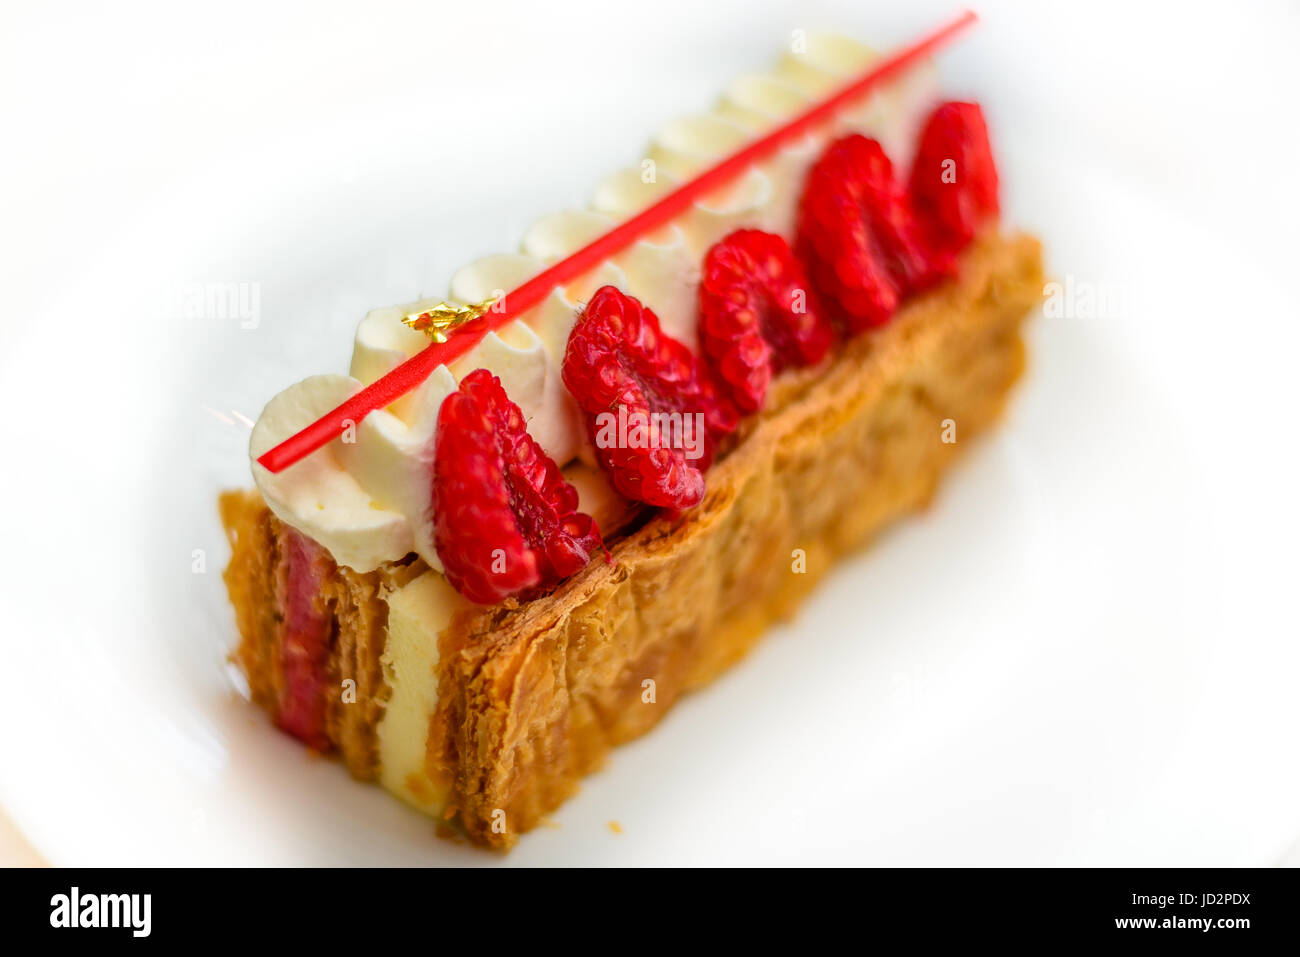 Vanilla and Raspberry Mille feuille pastry cake on white china plate Stock Photo